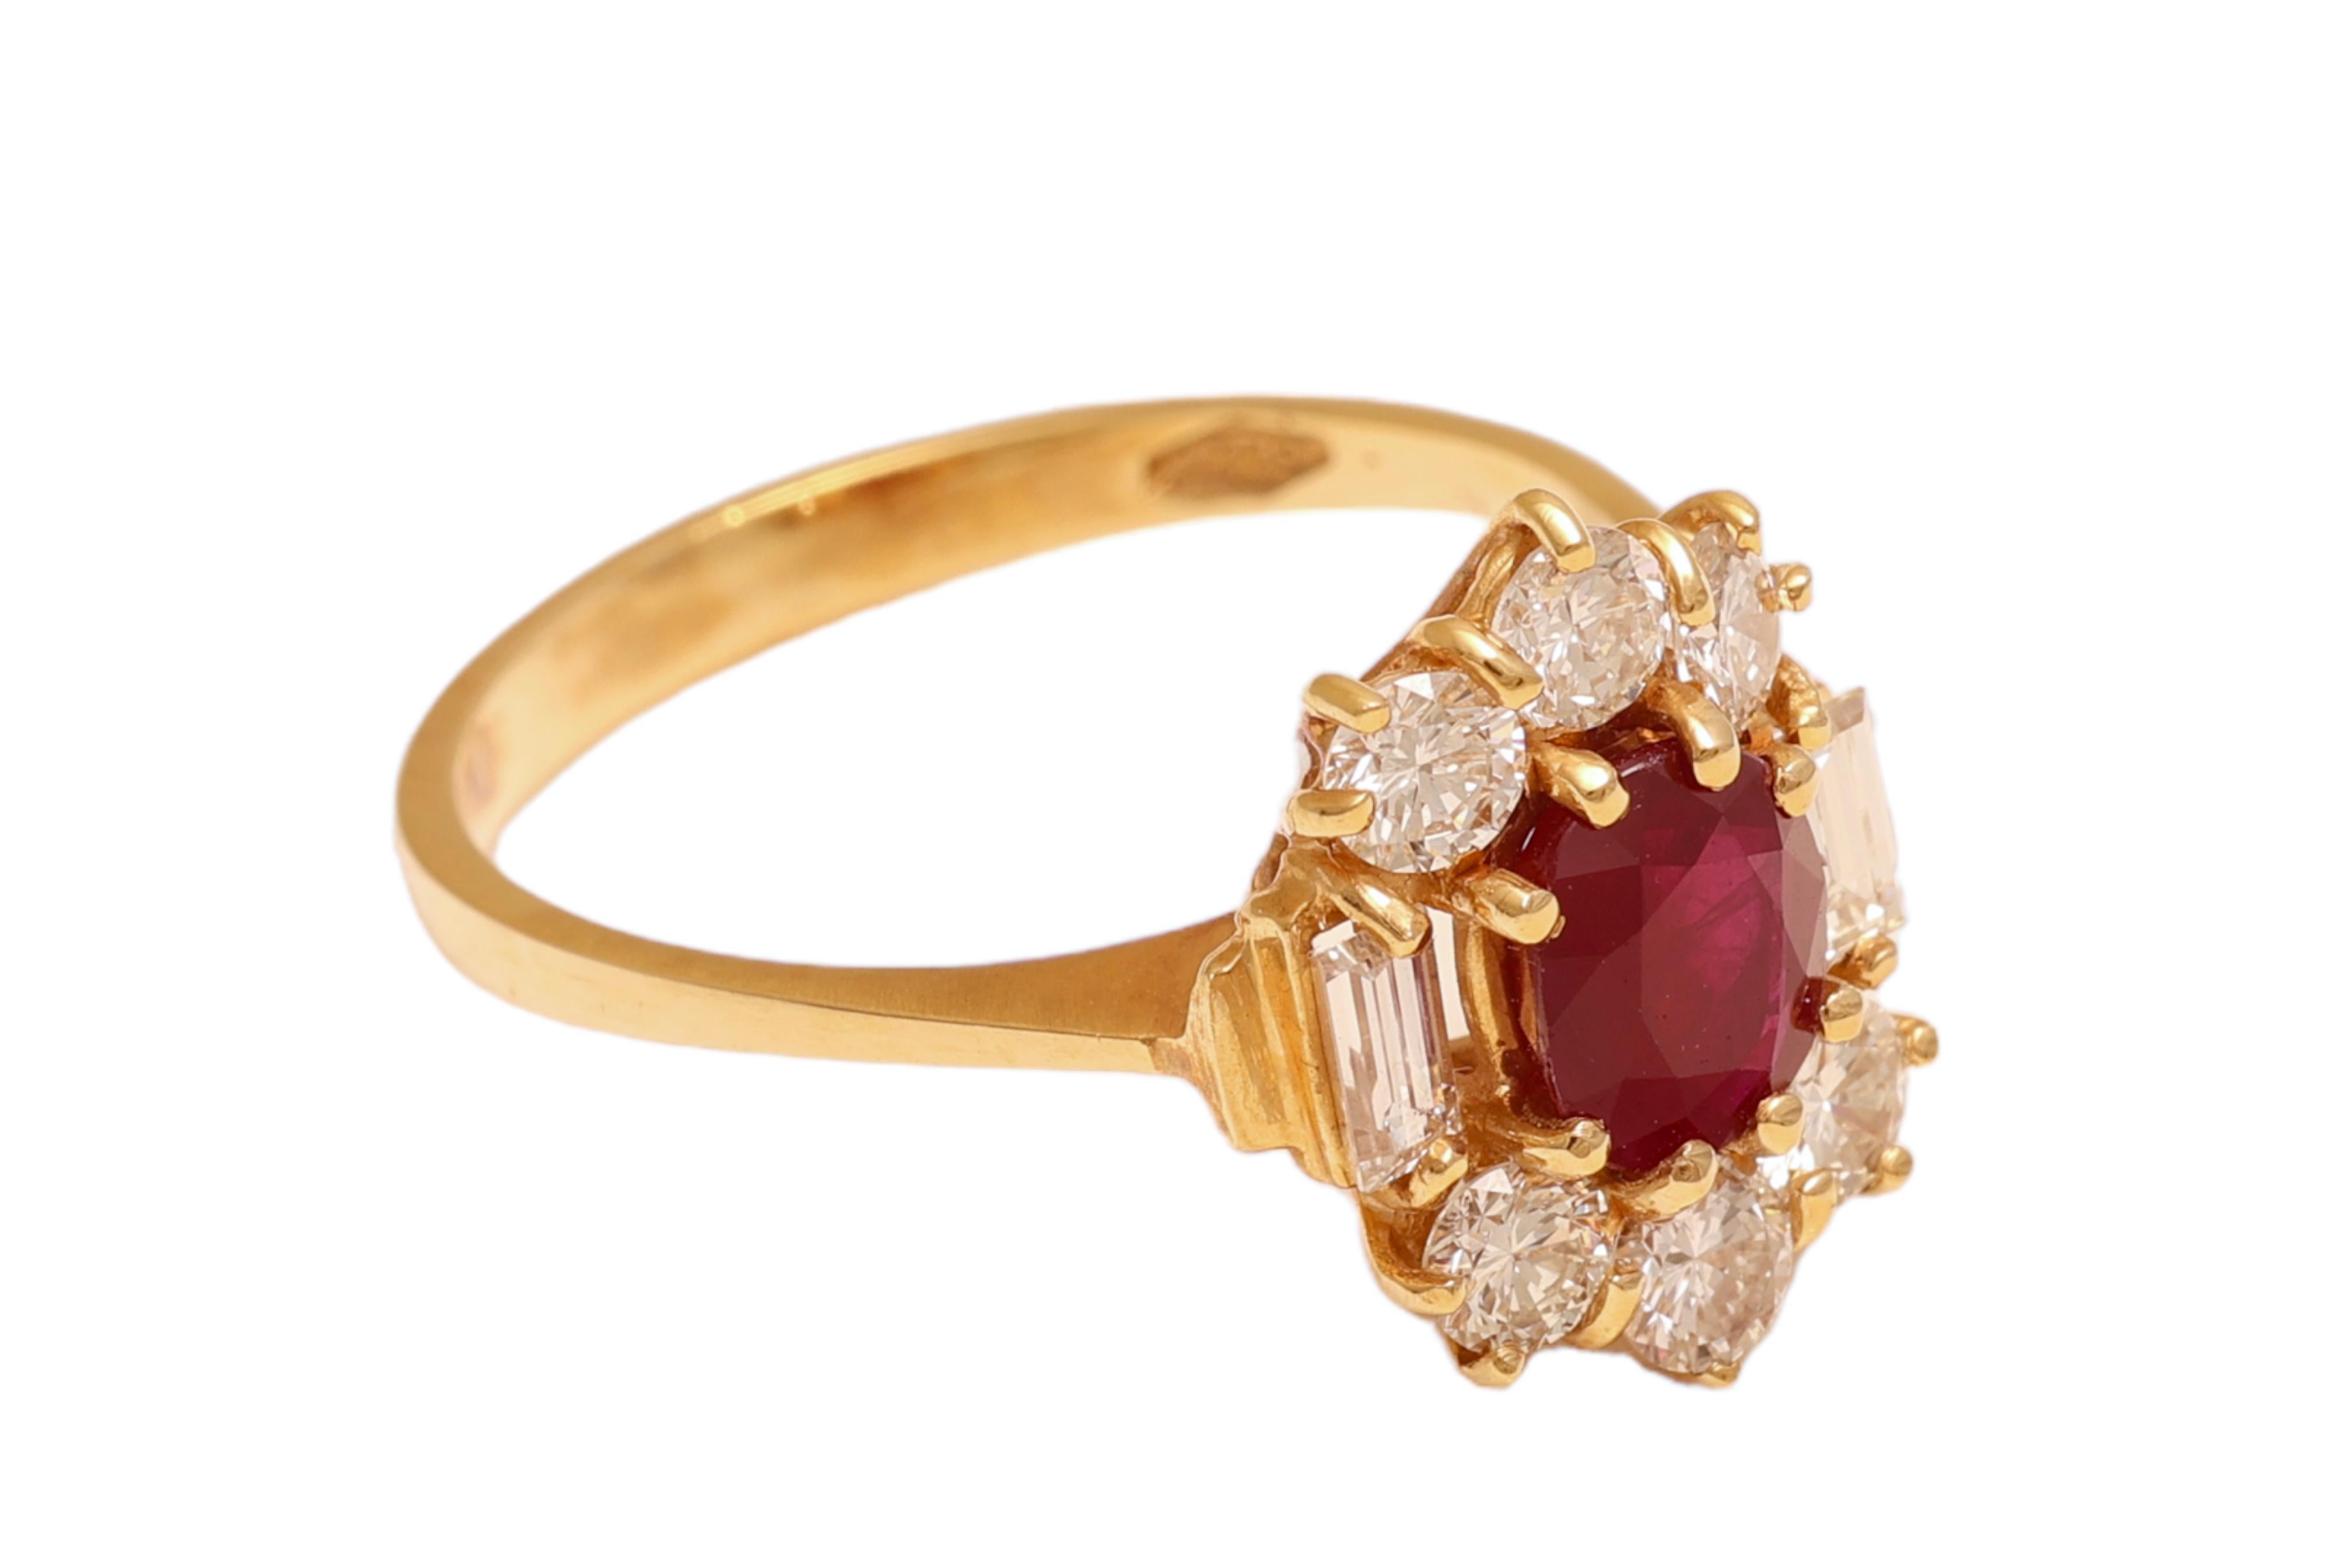 Gorgeous 18 kt. Yellow Gold Ring with Oval Ruby of 1.4 ct. and Diamonds of 1 ct. Together 

Ruby: Oval red ruby of  1,40 ct.

Brilliant cut : Brilliant cut & baguette cut diamonds together 1 ct. 

Material: 18 kt. yellow gold

Ring size: 57 EU / 8